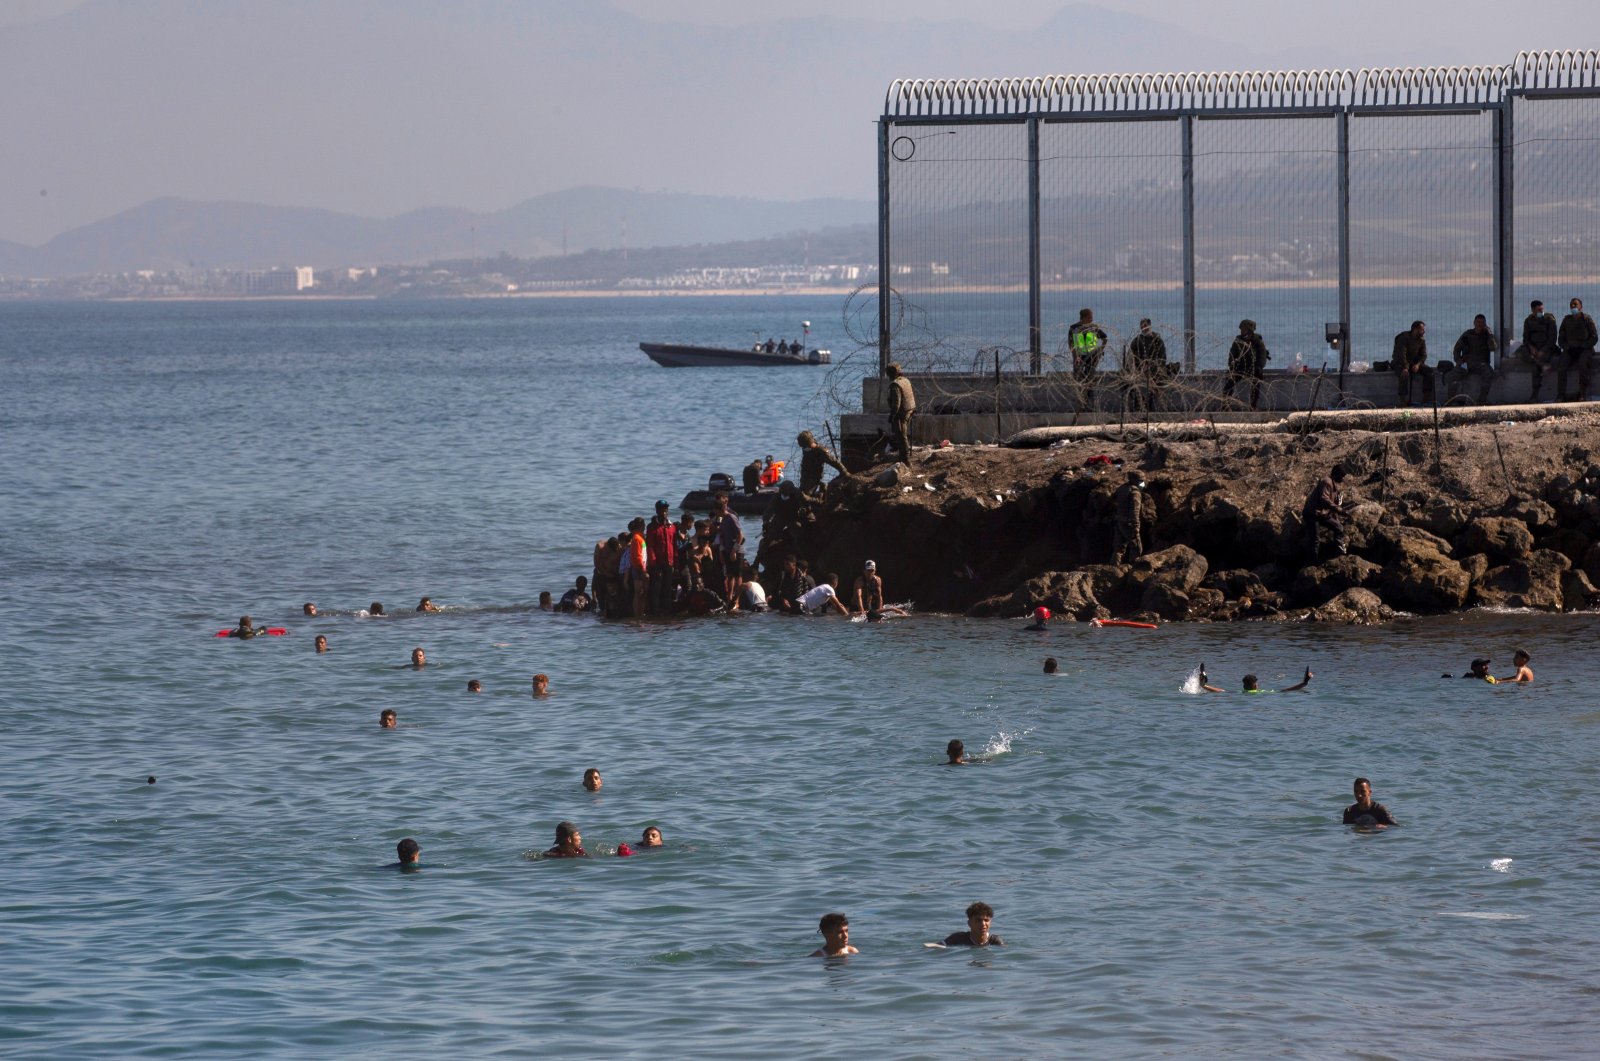 Migrants swim to cross the border of Tarajal in Ceuta, Spain. On the night of 18 May, a total of 5,000 Moroccan nationals entered the Spanish city of Ceuta, located on the North African coast, May 18, 2021. (EPA / BRAIS LORENZO)